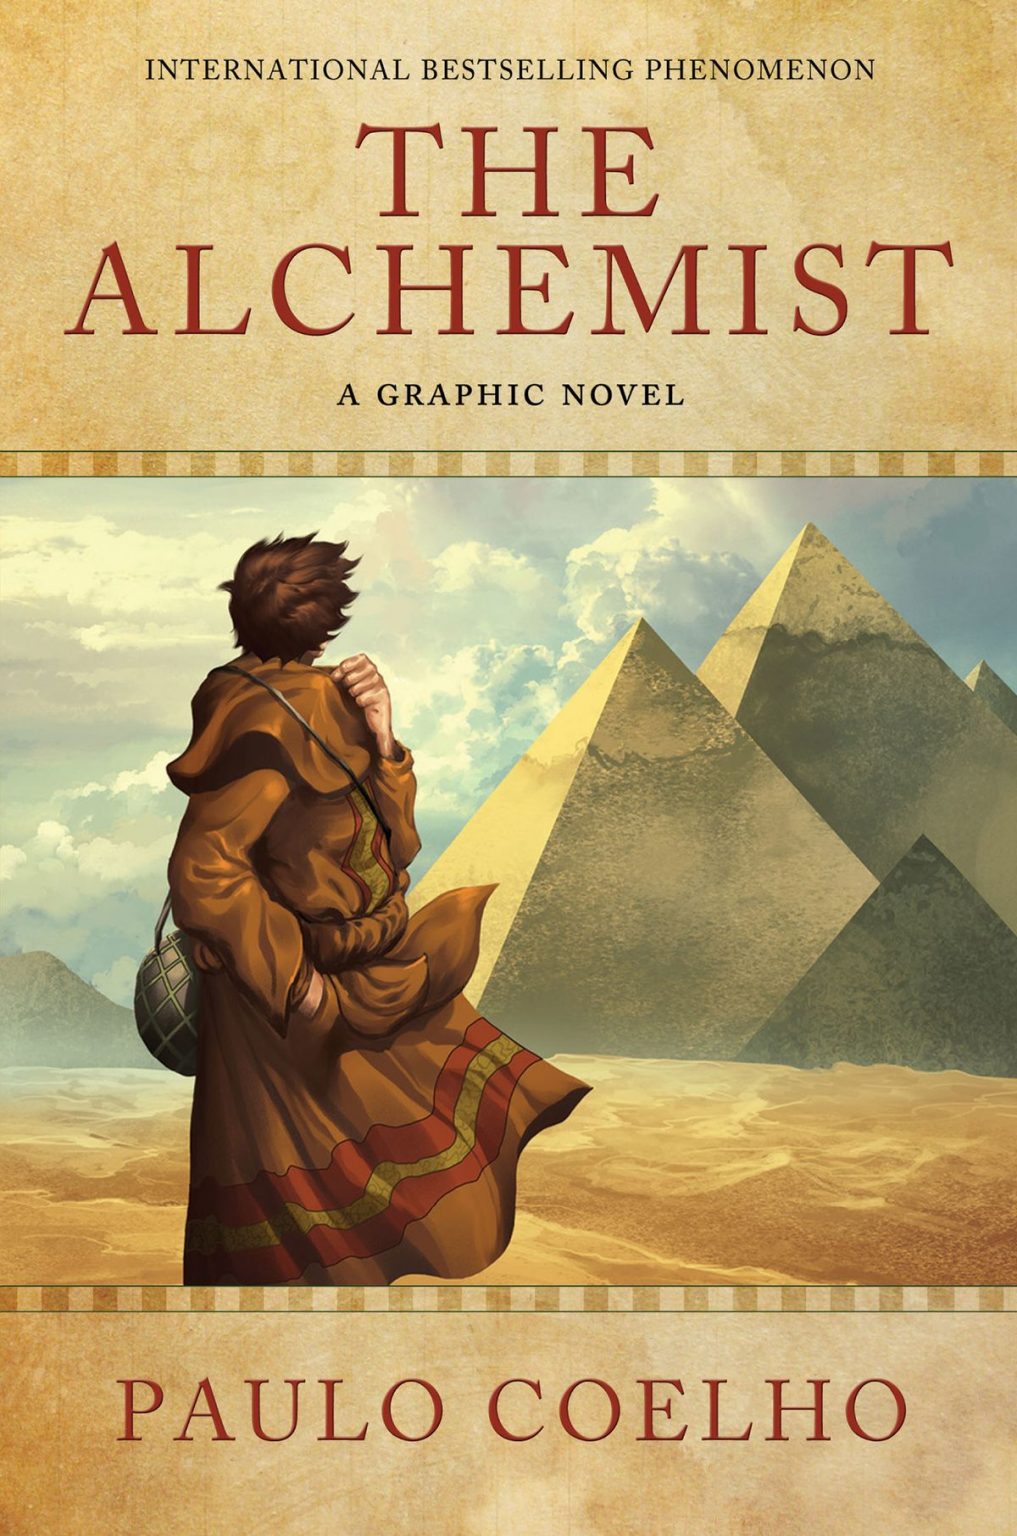 book review of alchemist in 100 words